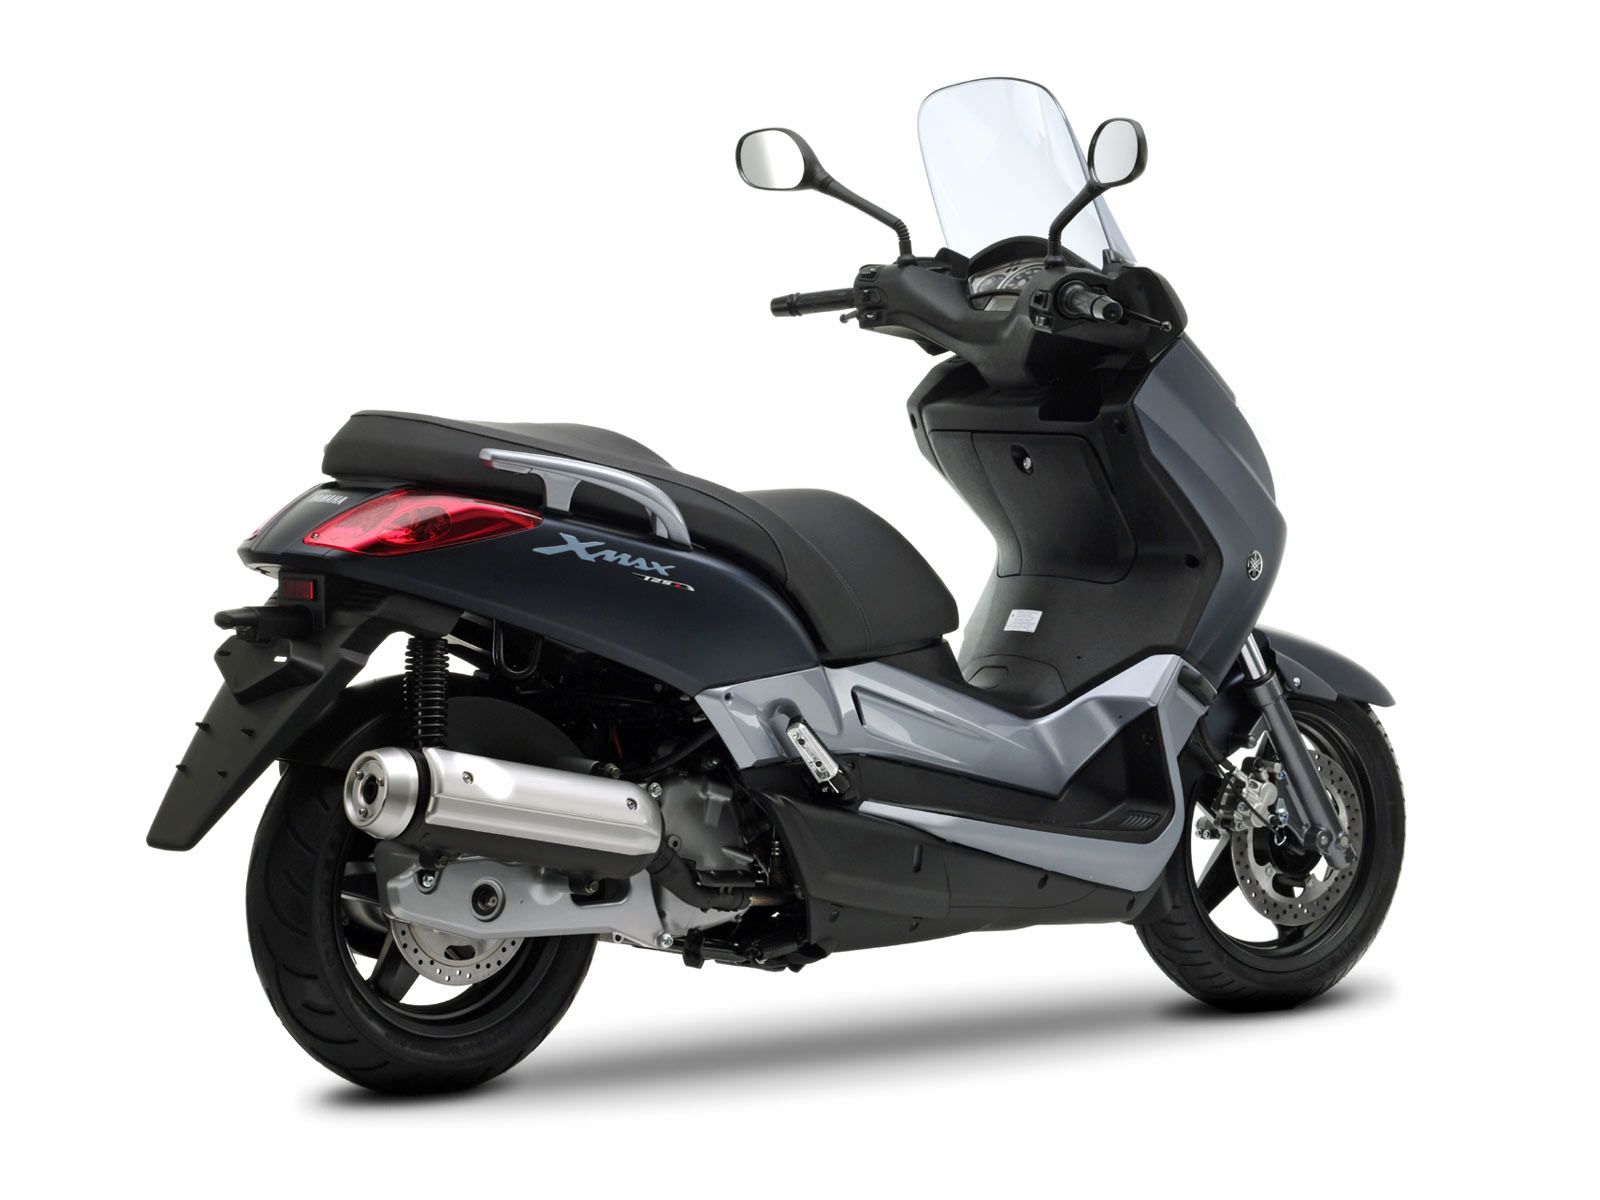 2008 YAMAHA X-Max 125 pictures, specifications